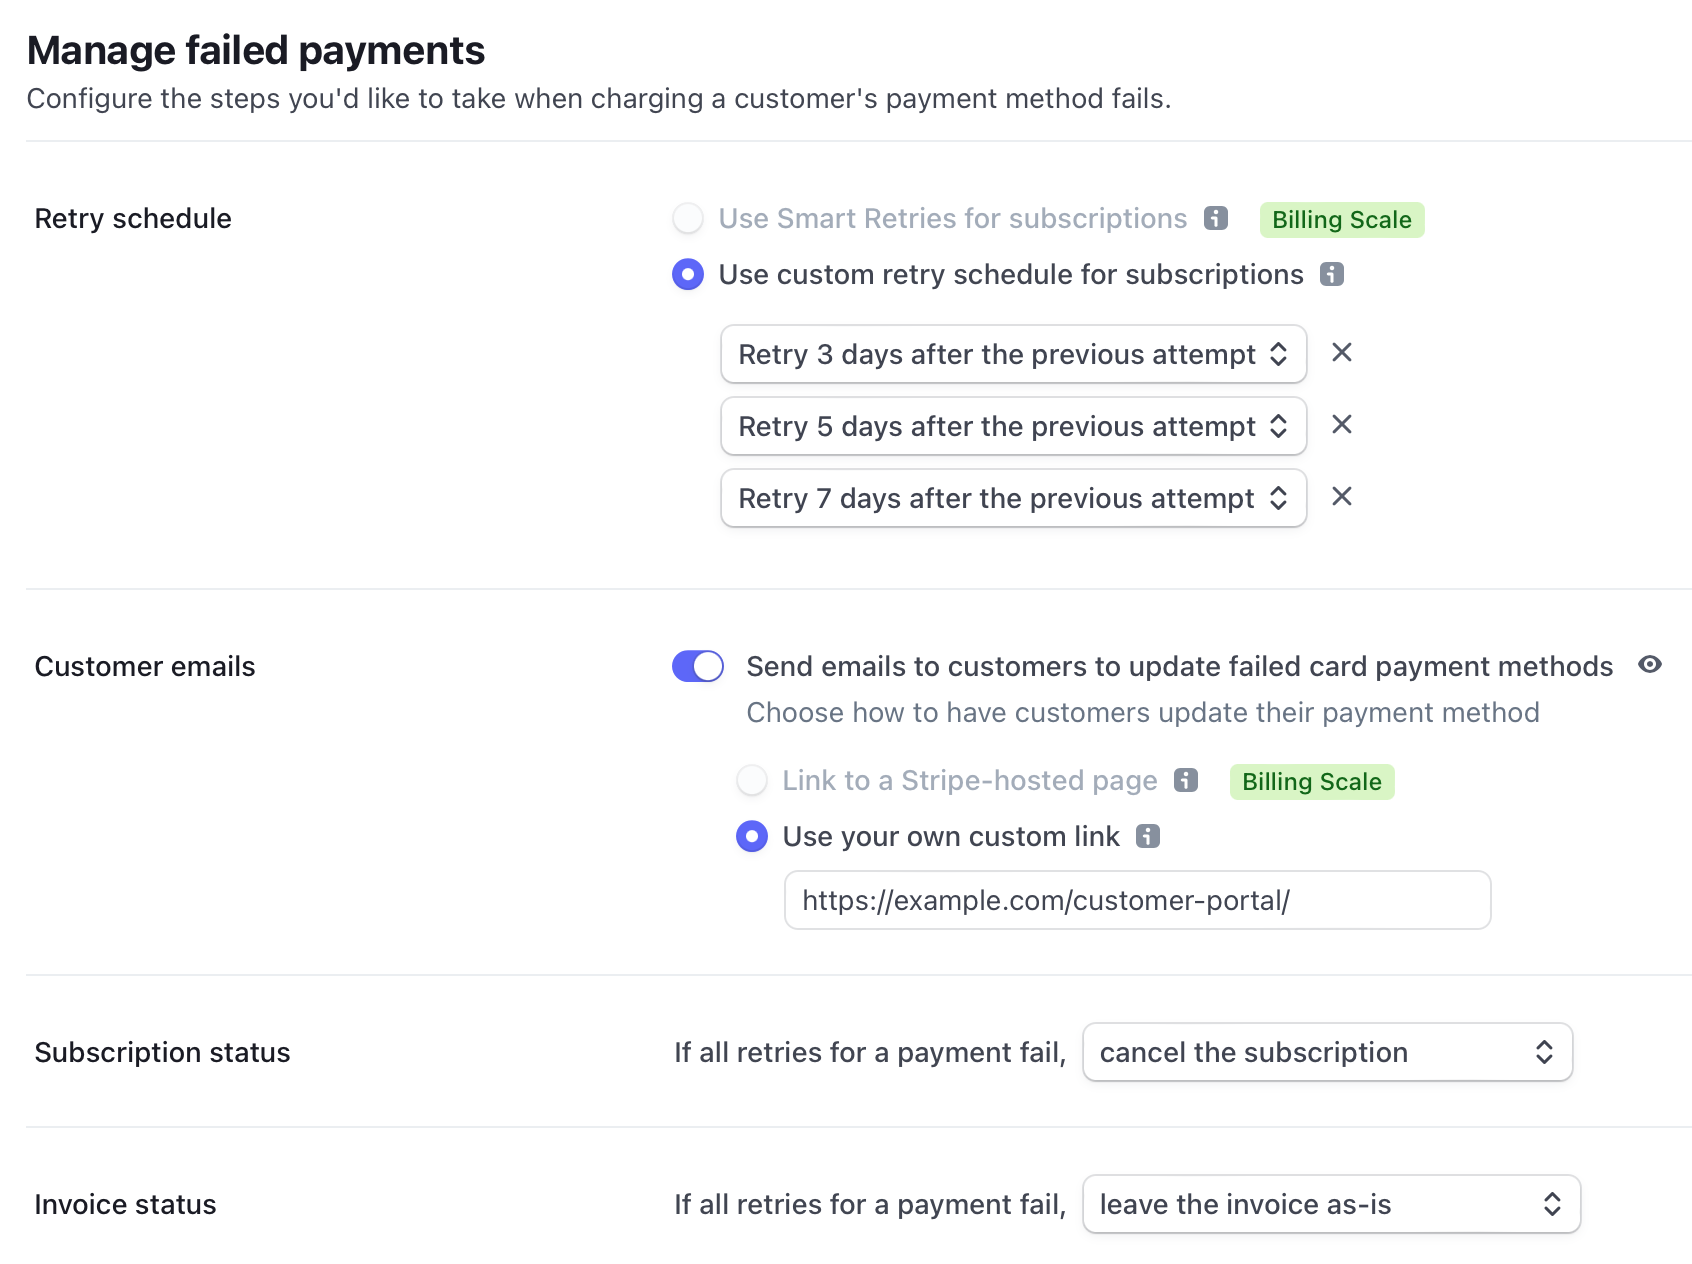 “Manage failed payments” section of Stripe.